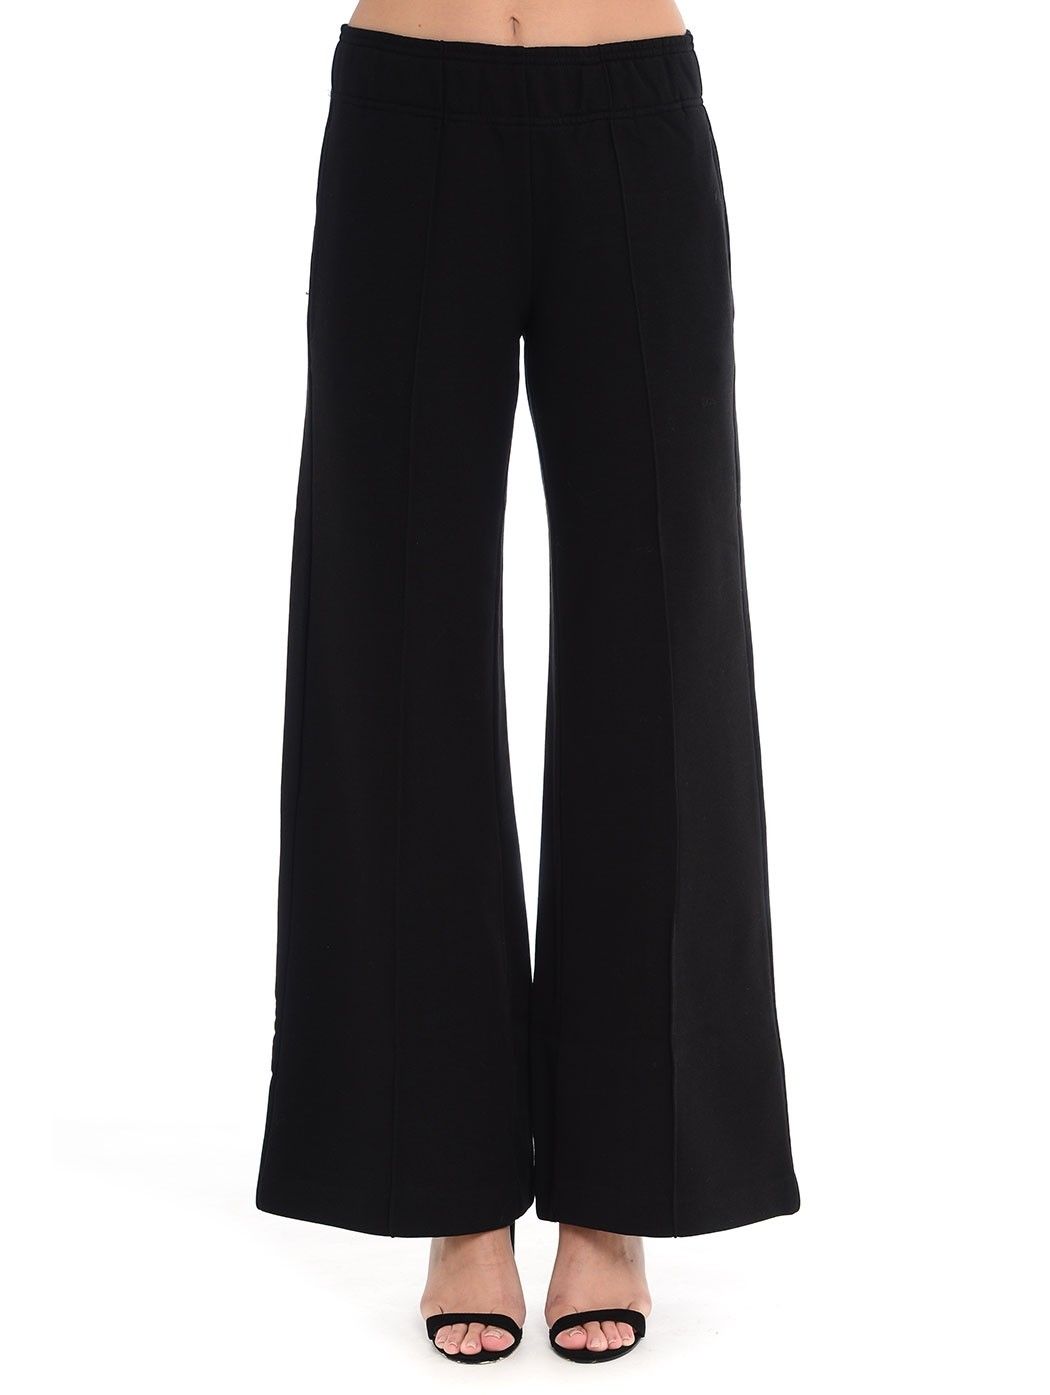  trousers,fall winter trousers,WOMEN TROUSERS  8 PM ASTROFILLITE-A